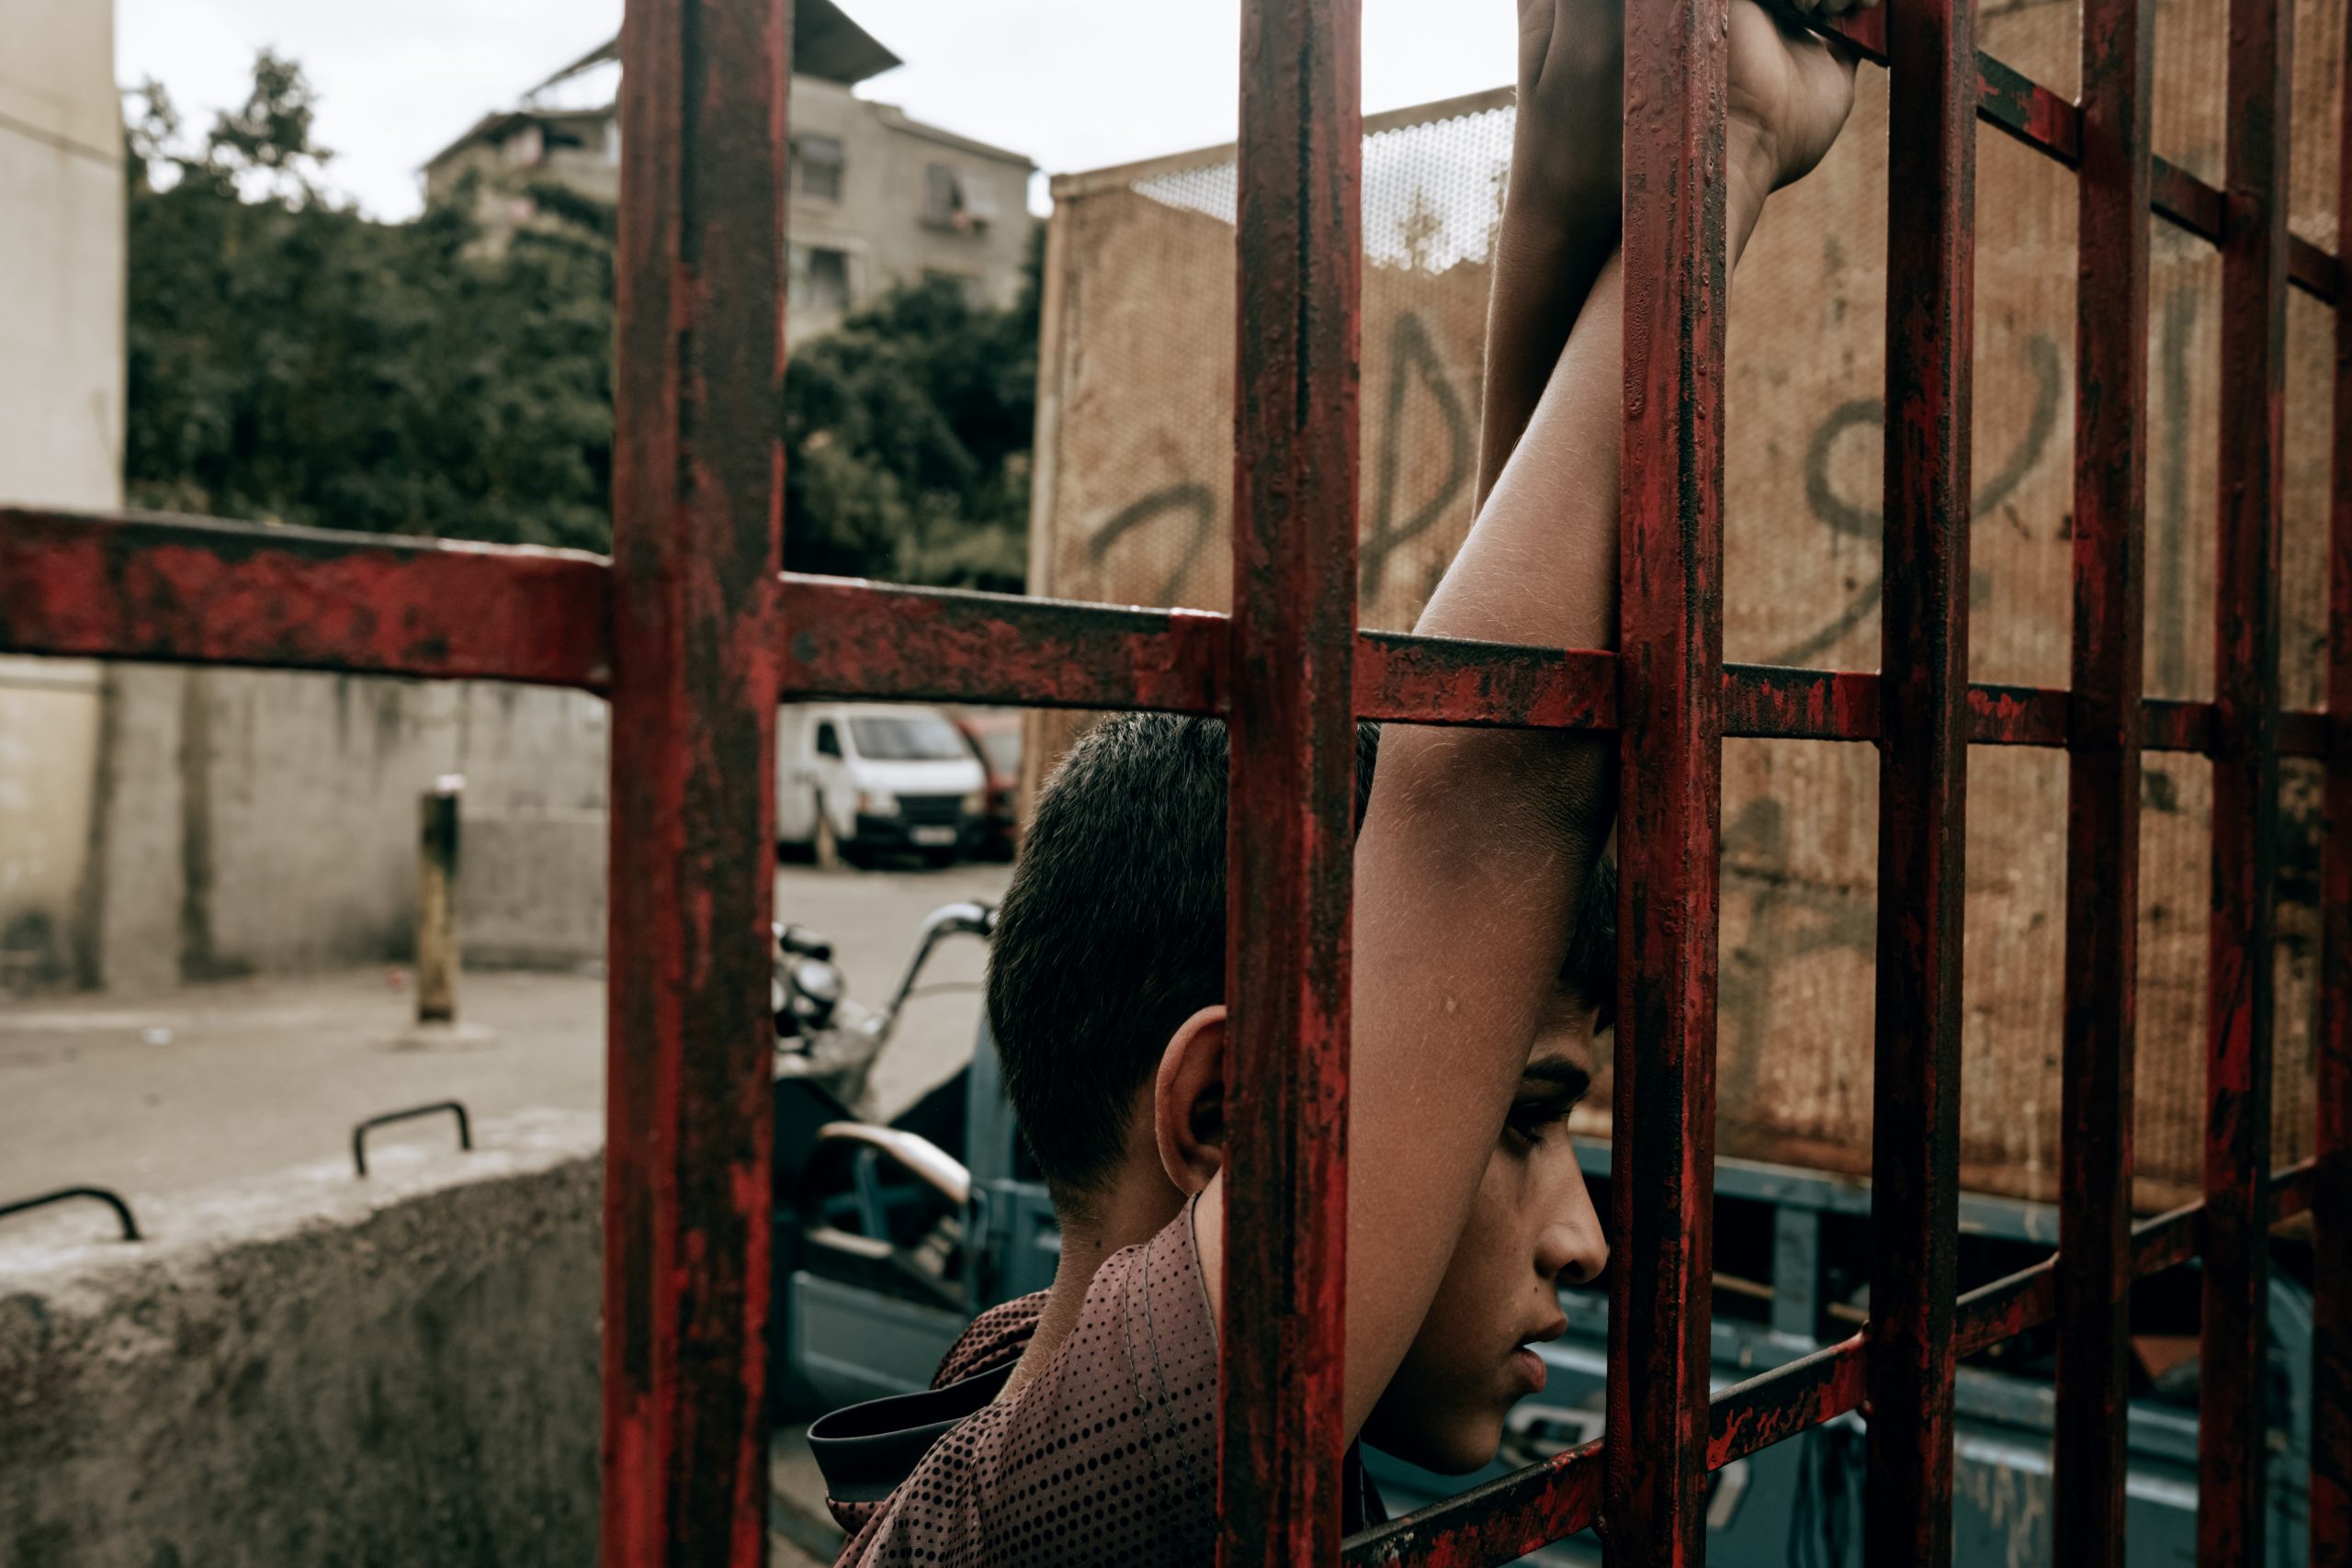 A young boy watches a soccer game, while standing behind bars, Shatila, Beirut, Lebanon. 11 October 2020. Karine Pierre, Agence Hans Lucas, via Reuters.